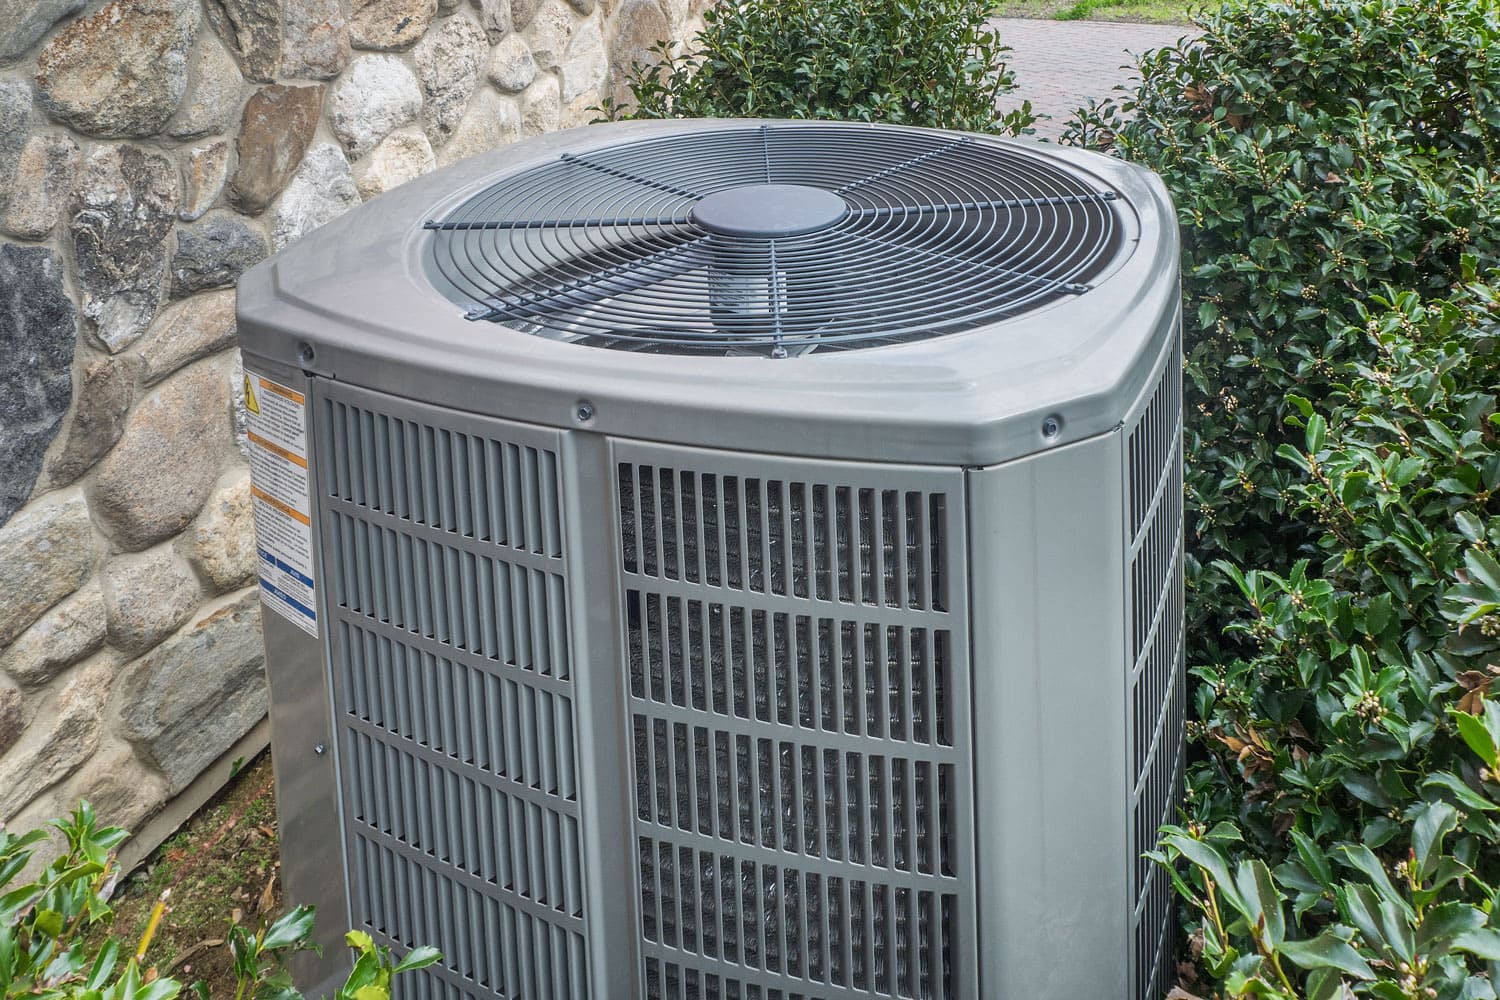 Huge air component might not be compatible to your small ac unit